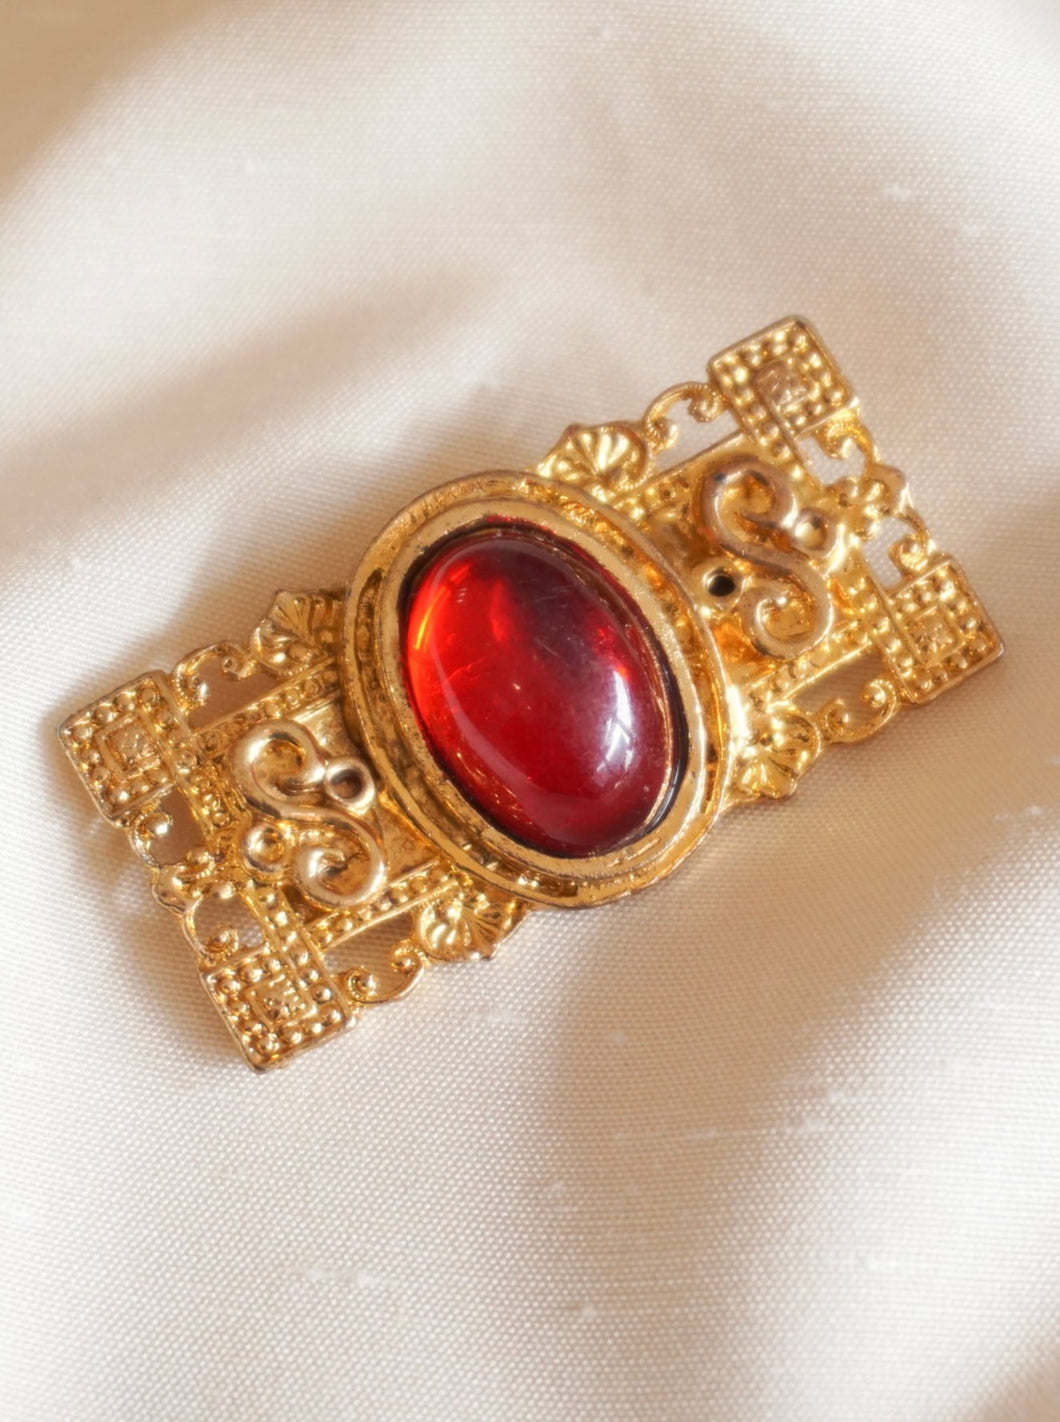 Vintage golden and red rectangle brooch